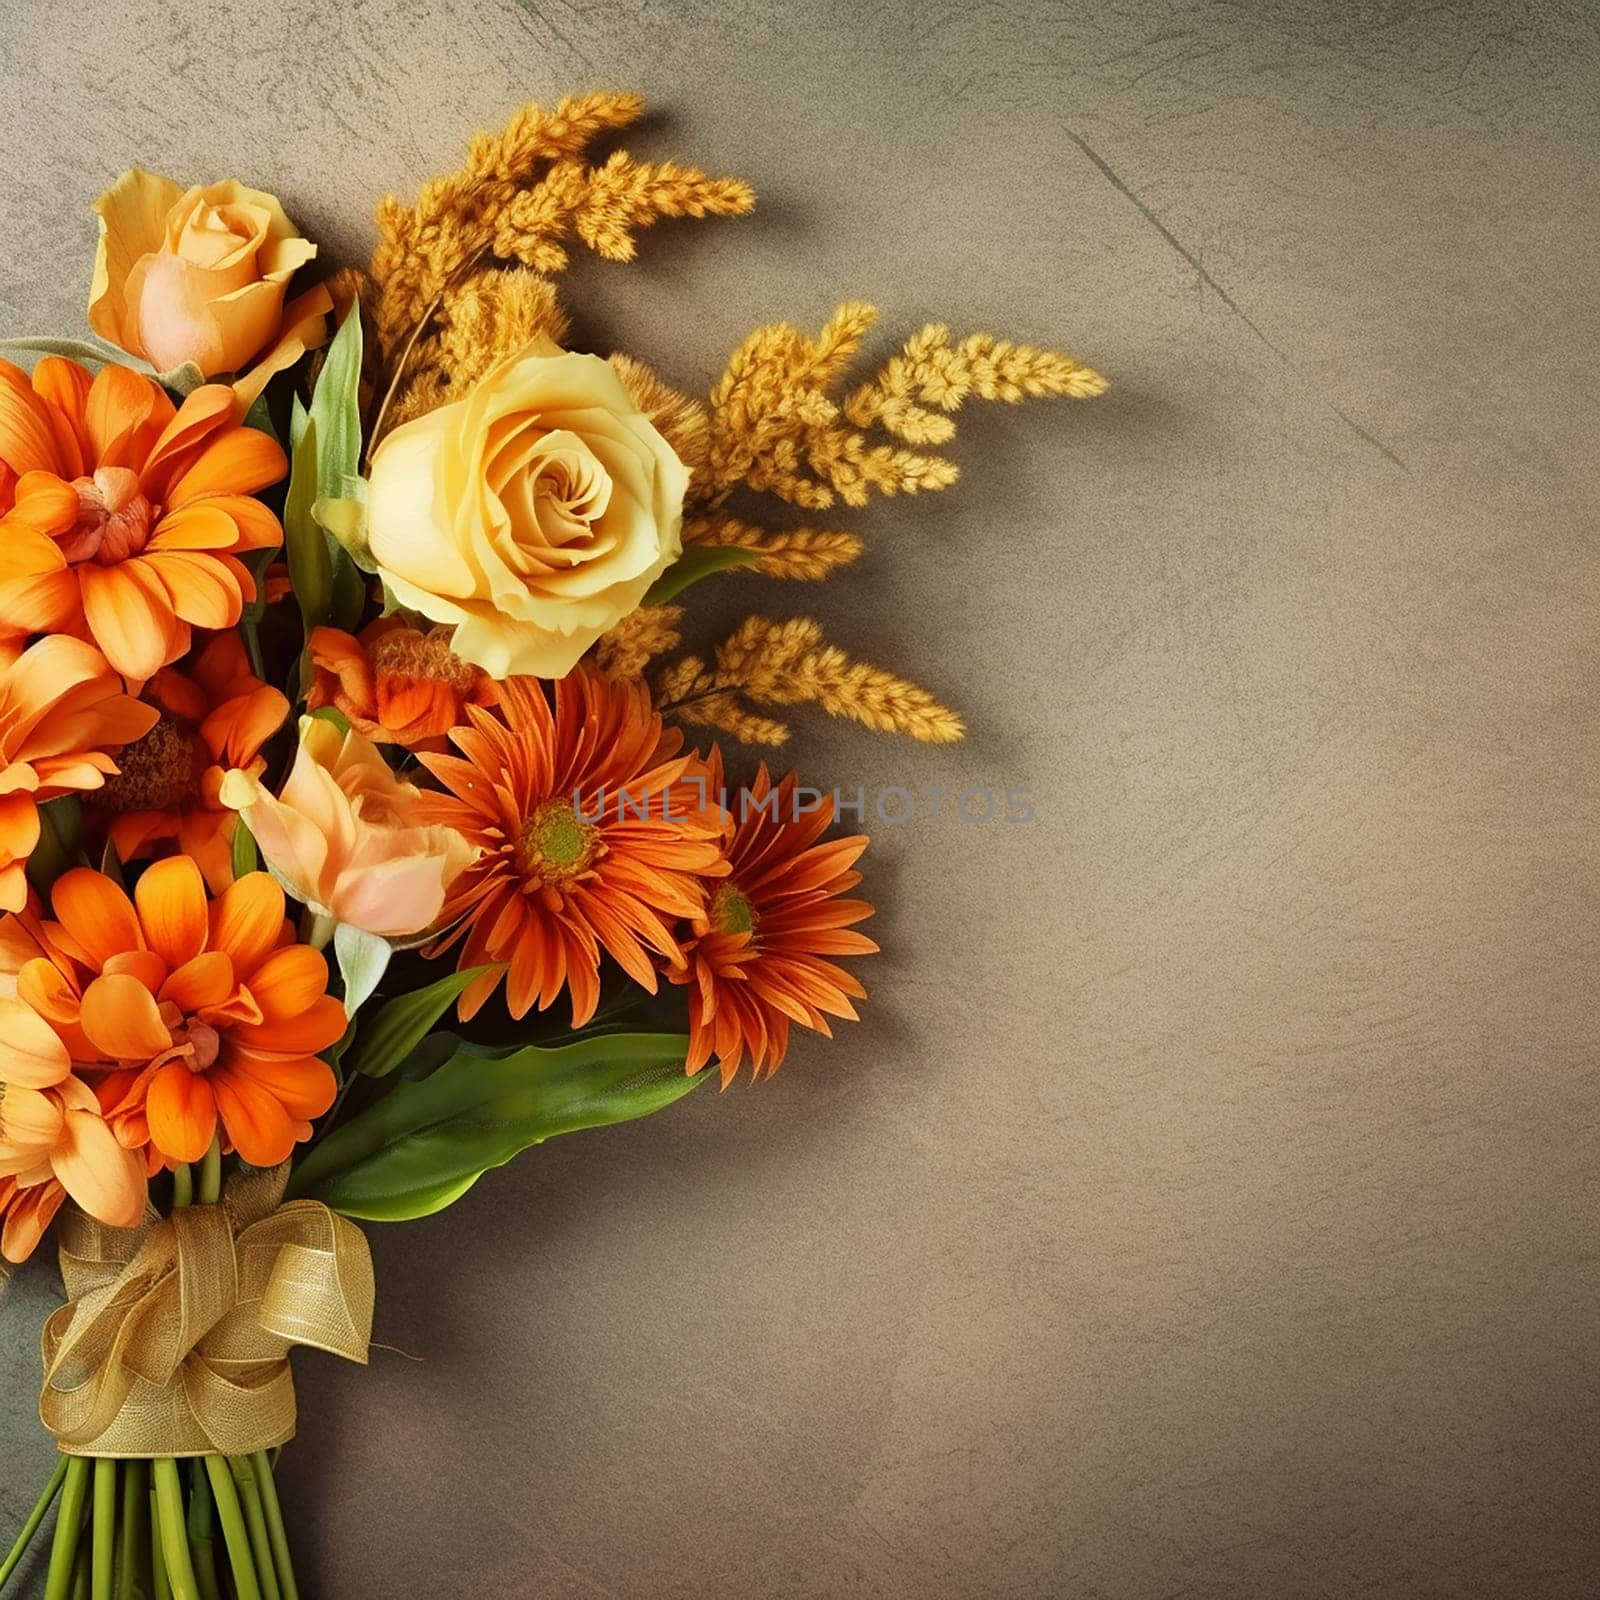 A bouquet with orange flowers, roses, and wheat on a textured background. by Hype2art